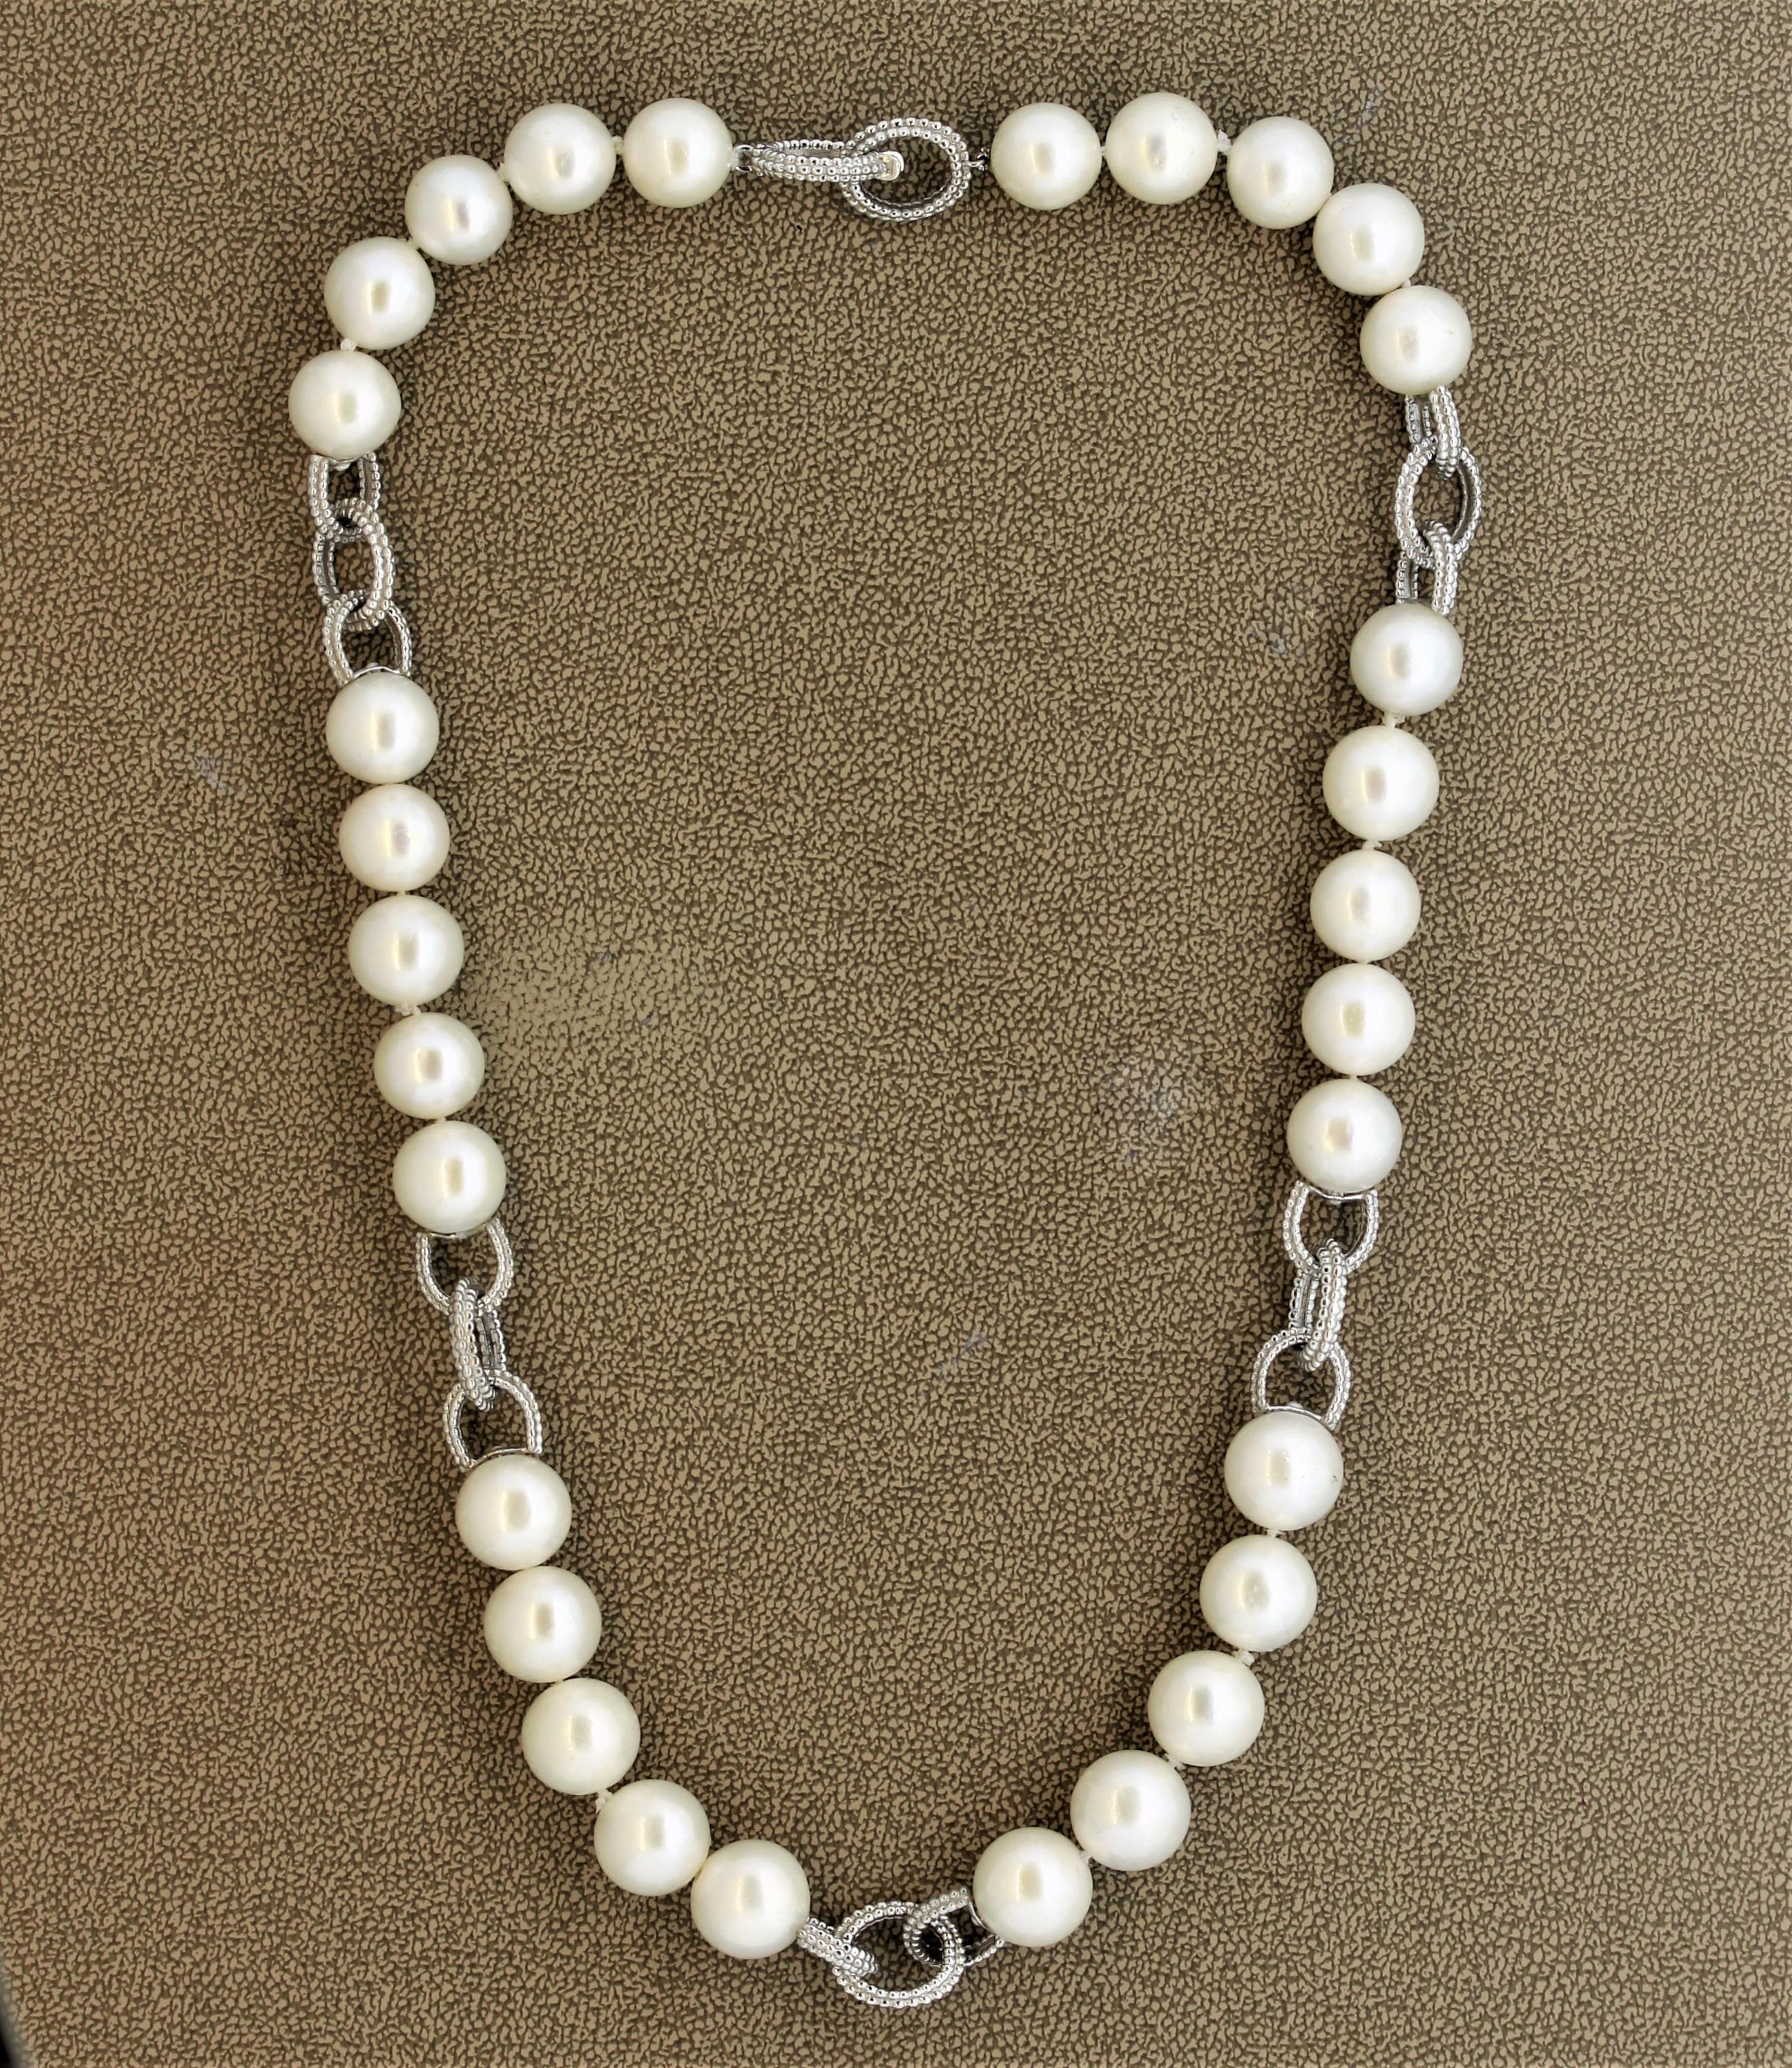 Here we have a modern take of a traditional pearl strand. There are a total of 30 round Akoya pearls separated 5 at a time with white gold hoop-links. The pearls measure 10.5 – 11.0 millimeters each.

Length: 18 inches